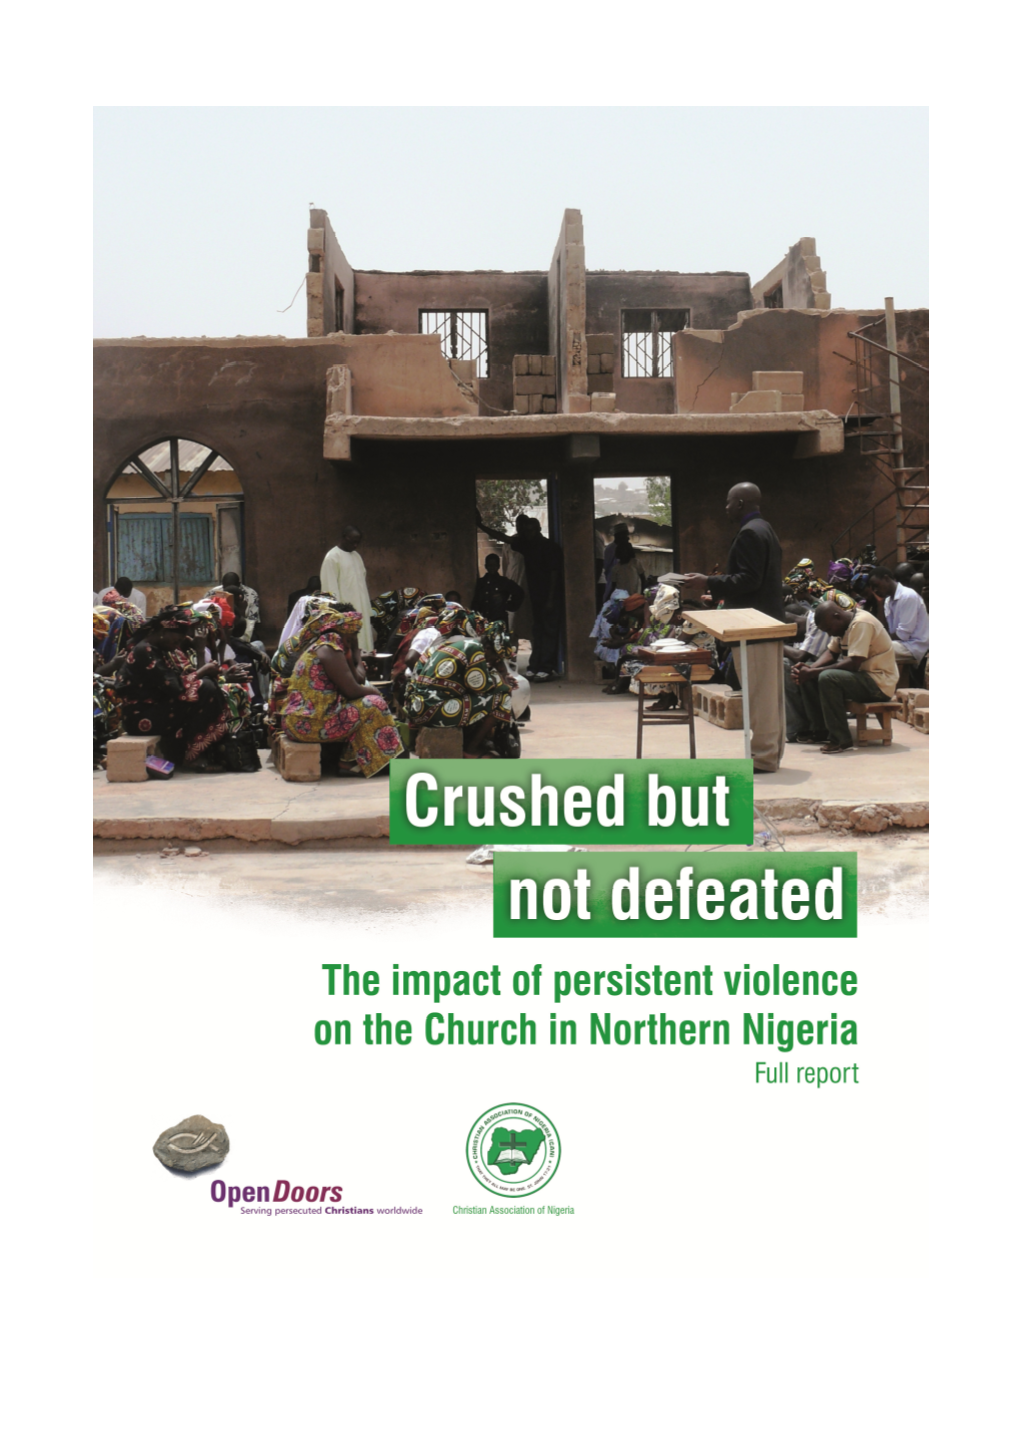 Impact of Persistent Violence on the Church in Northern Nigeria